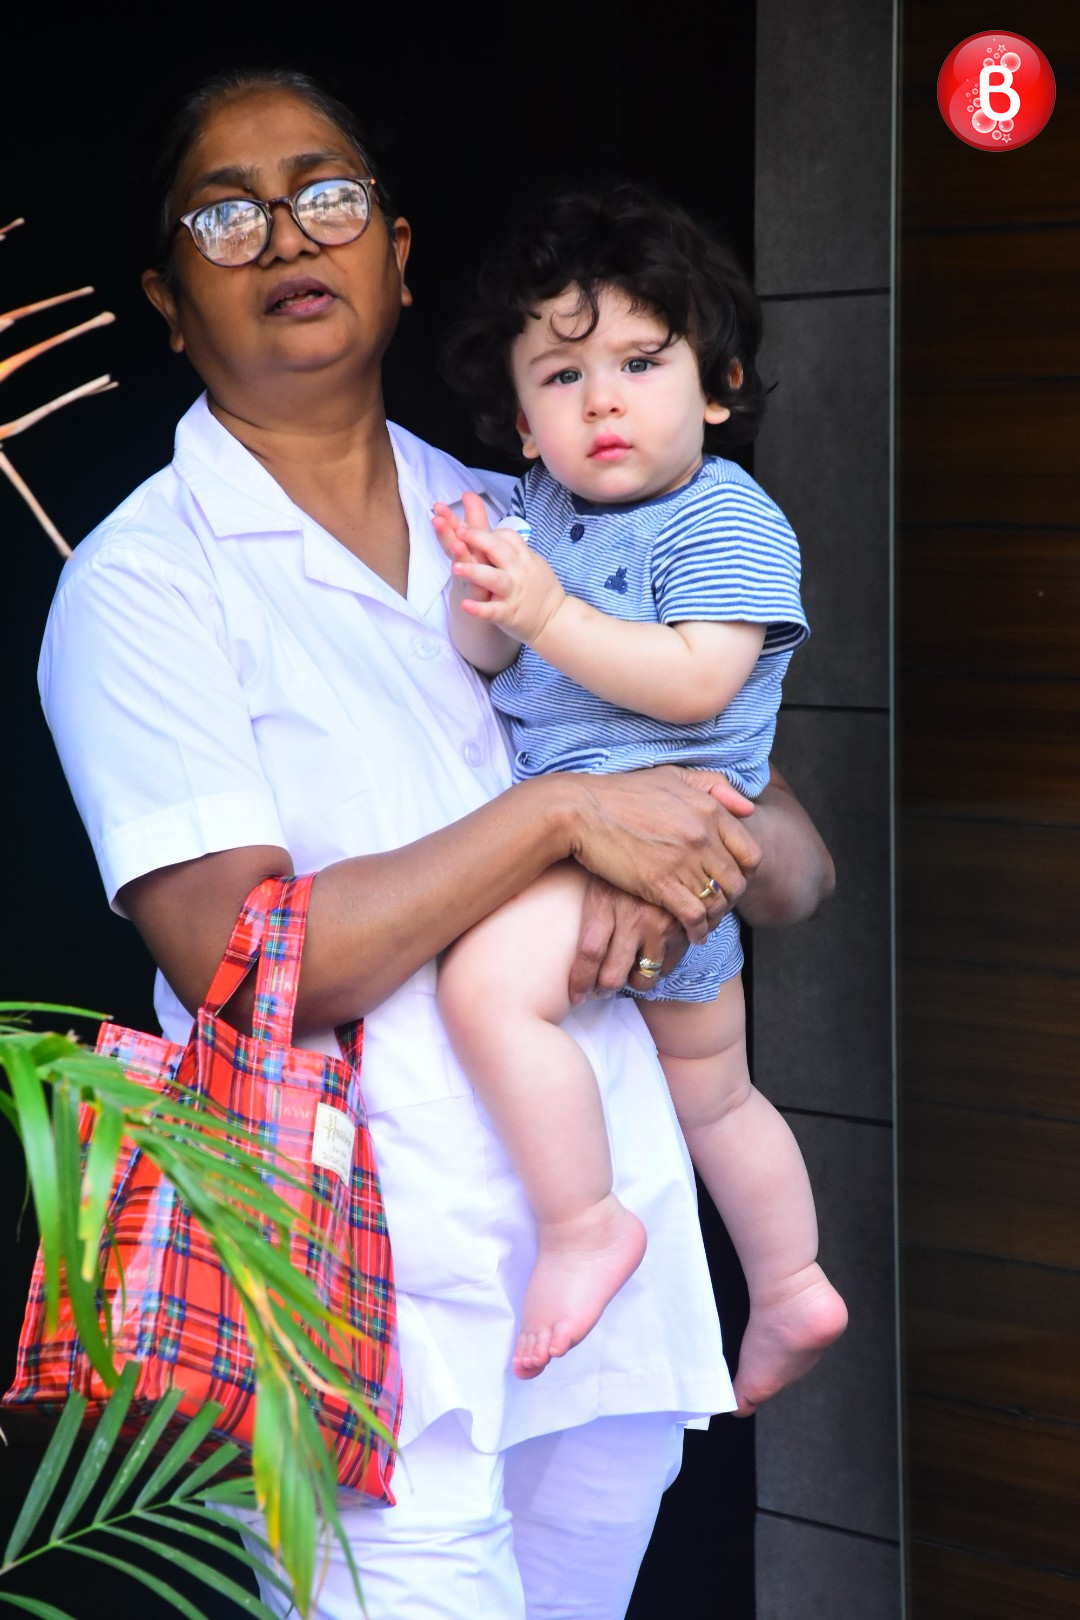 taimur ali khan’s spotted pictures